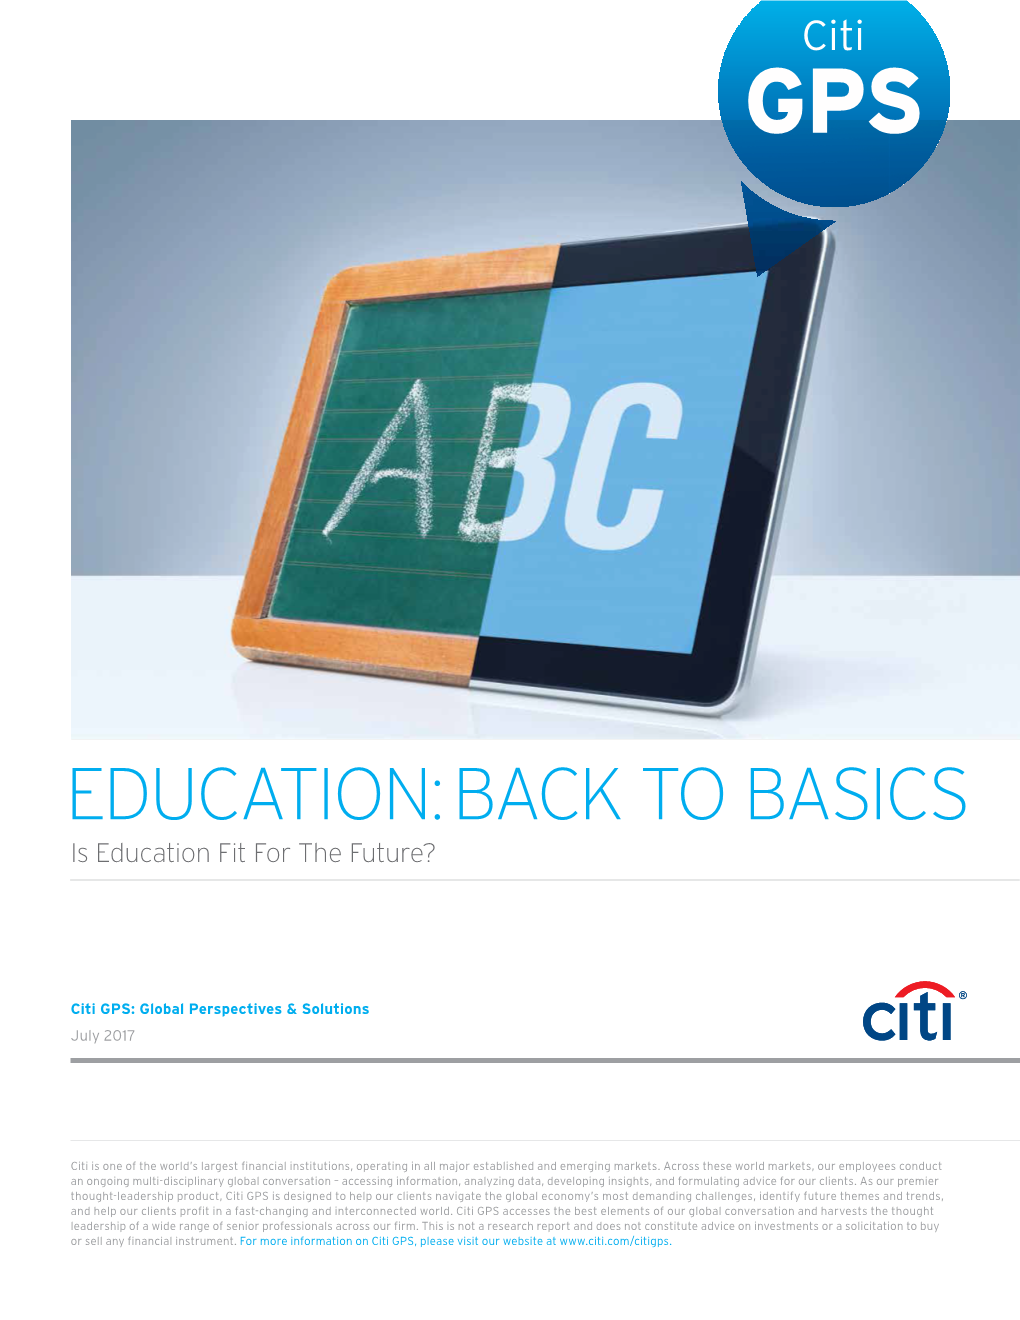 EDUCATION: BACK to BASICS: Is Education Fit for the Future